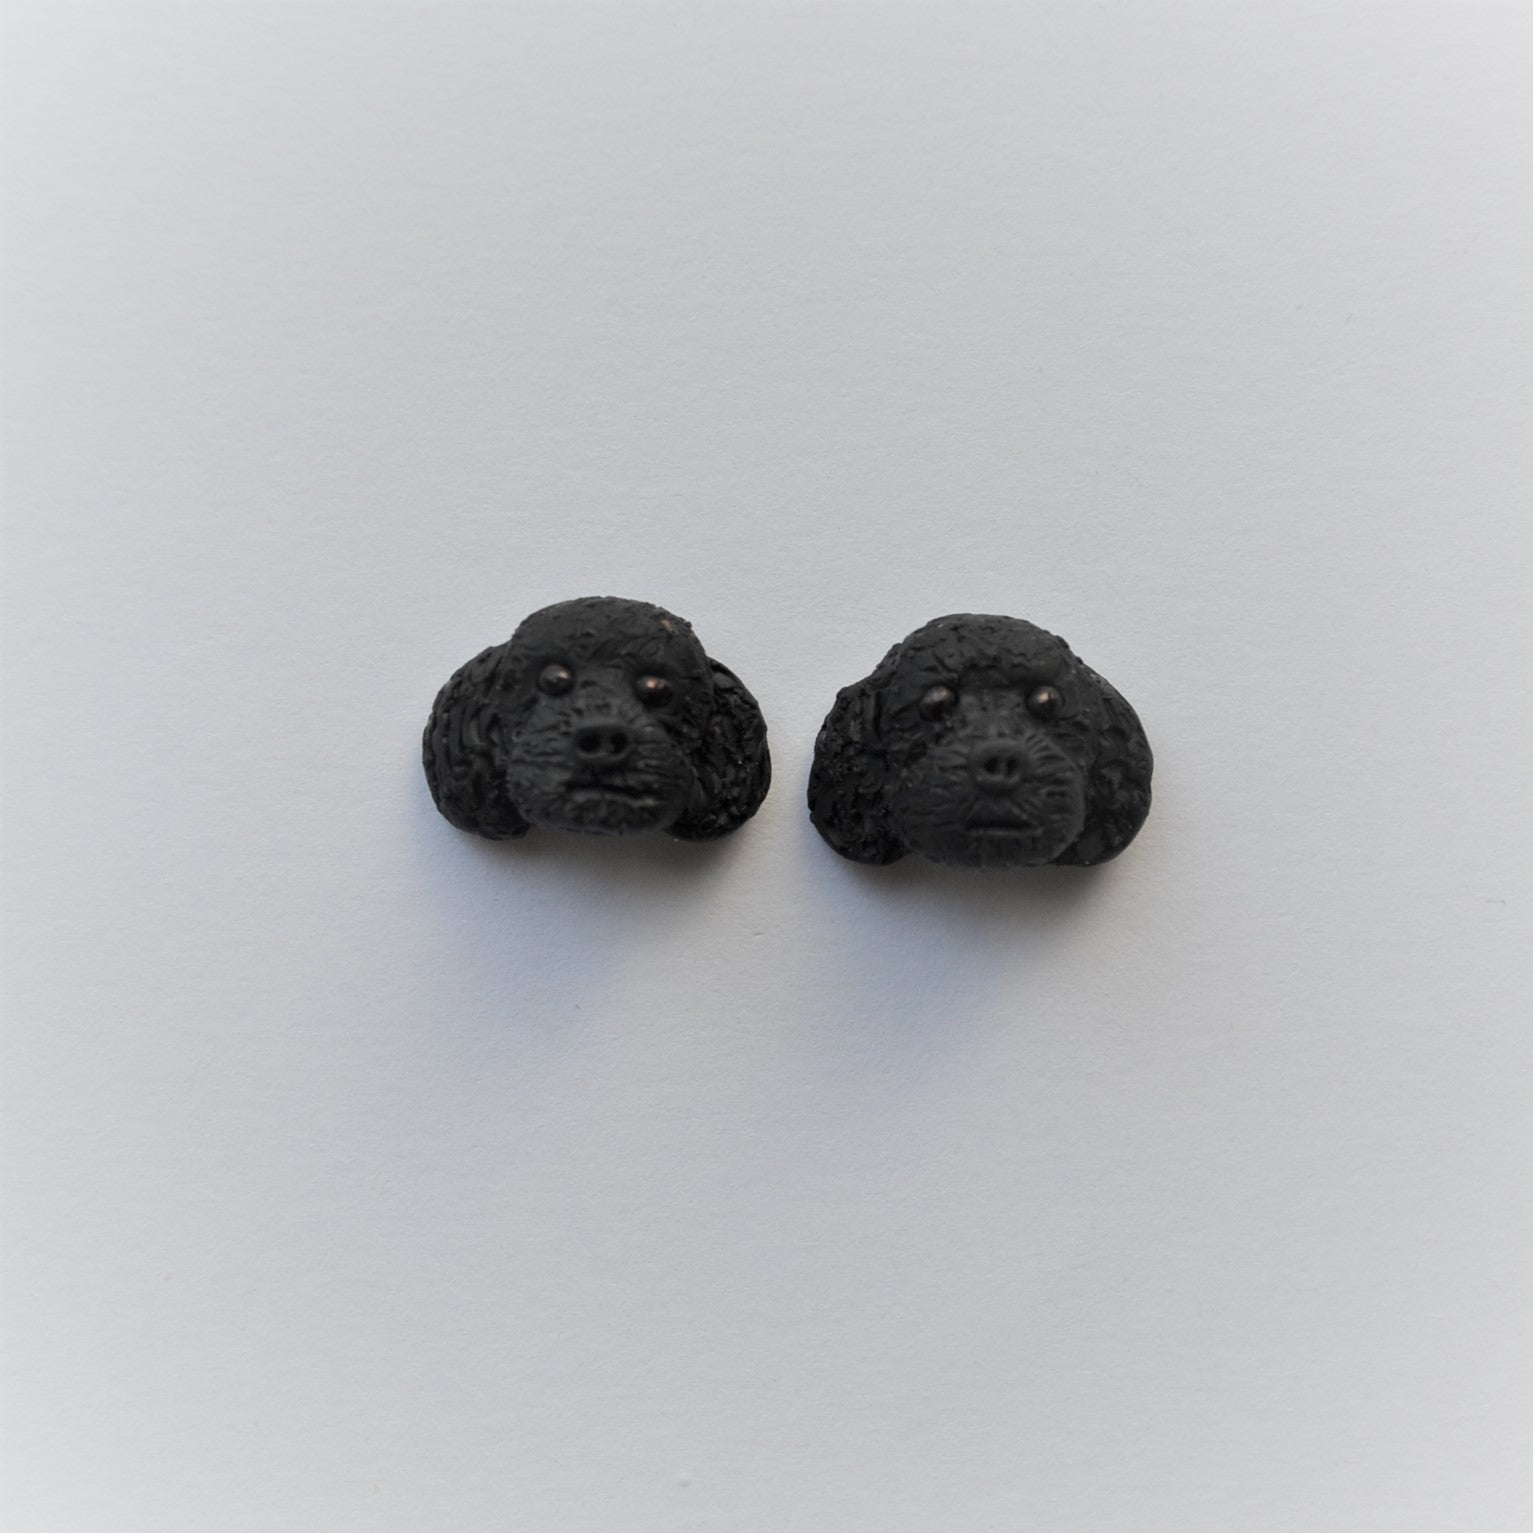 Handmade polymer clay black poodle stud earrings shown on white background